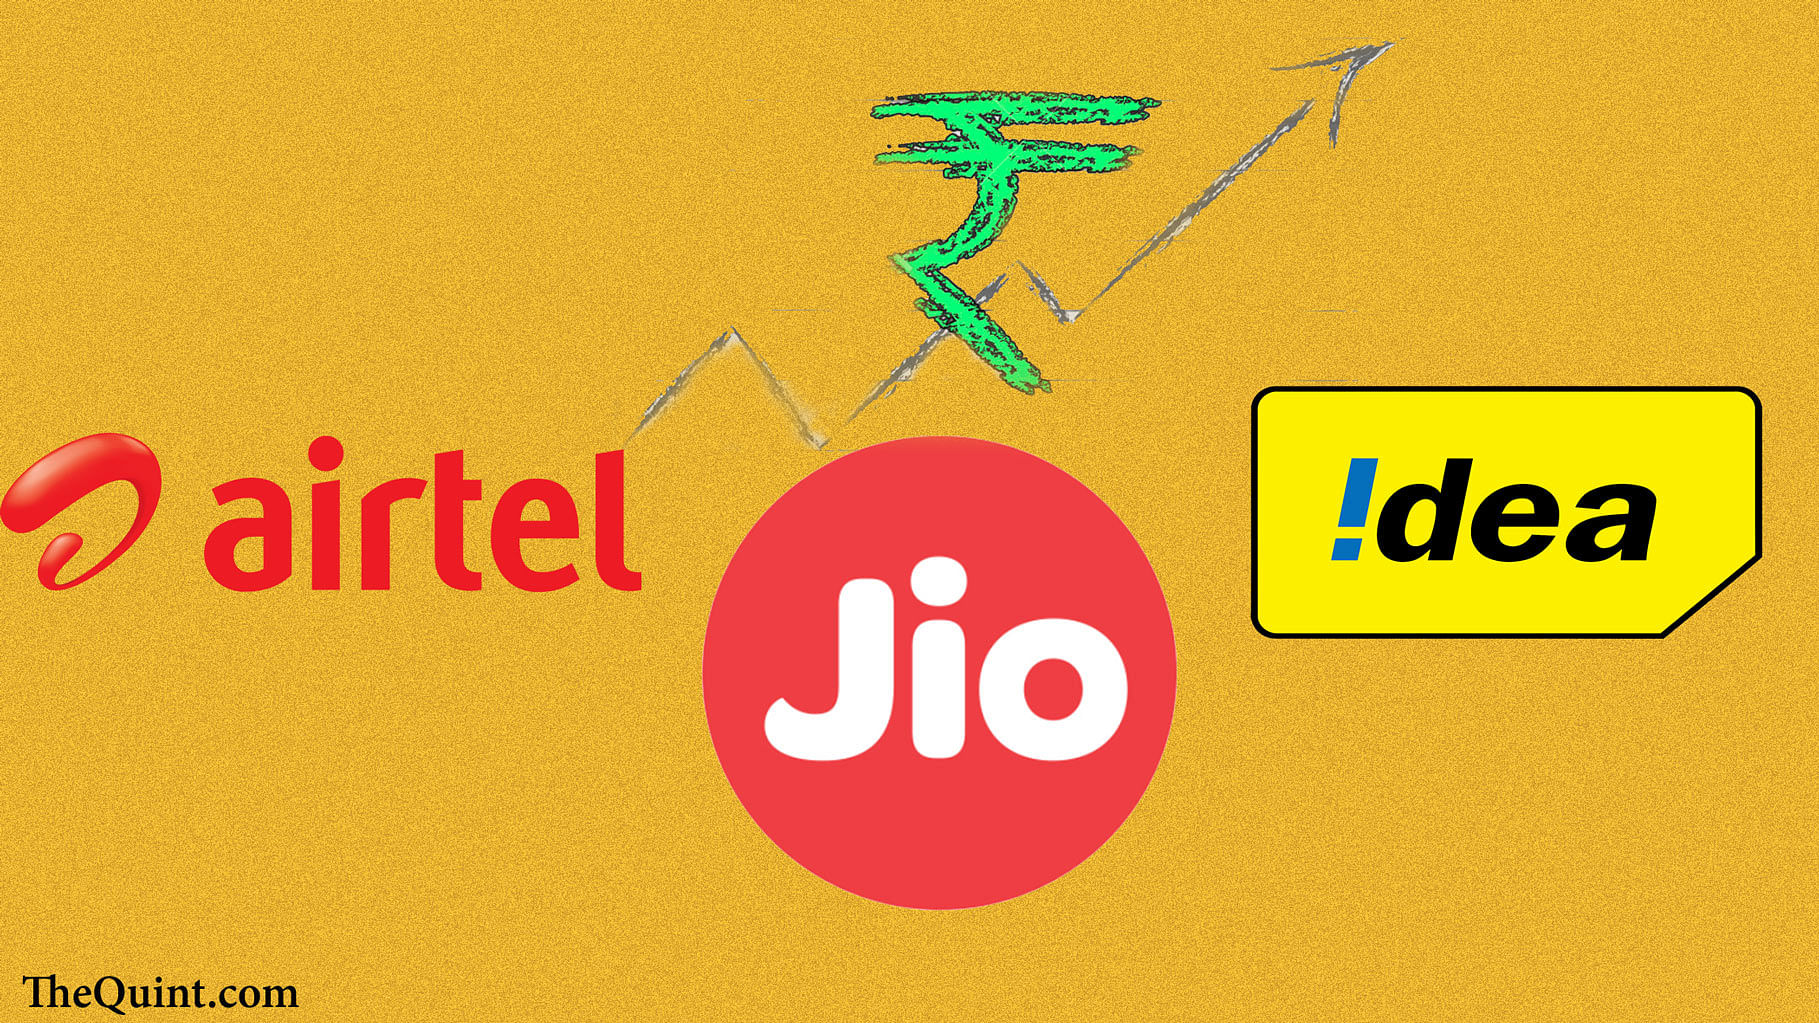 Bharti Airtel lost approximately Rs 9,800 crore and Idea lost roughly Rs 2,450 crore of market cap. (Photo: The Quint)